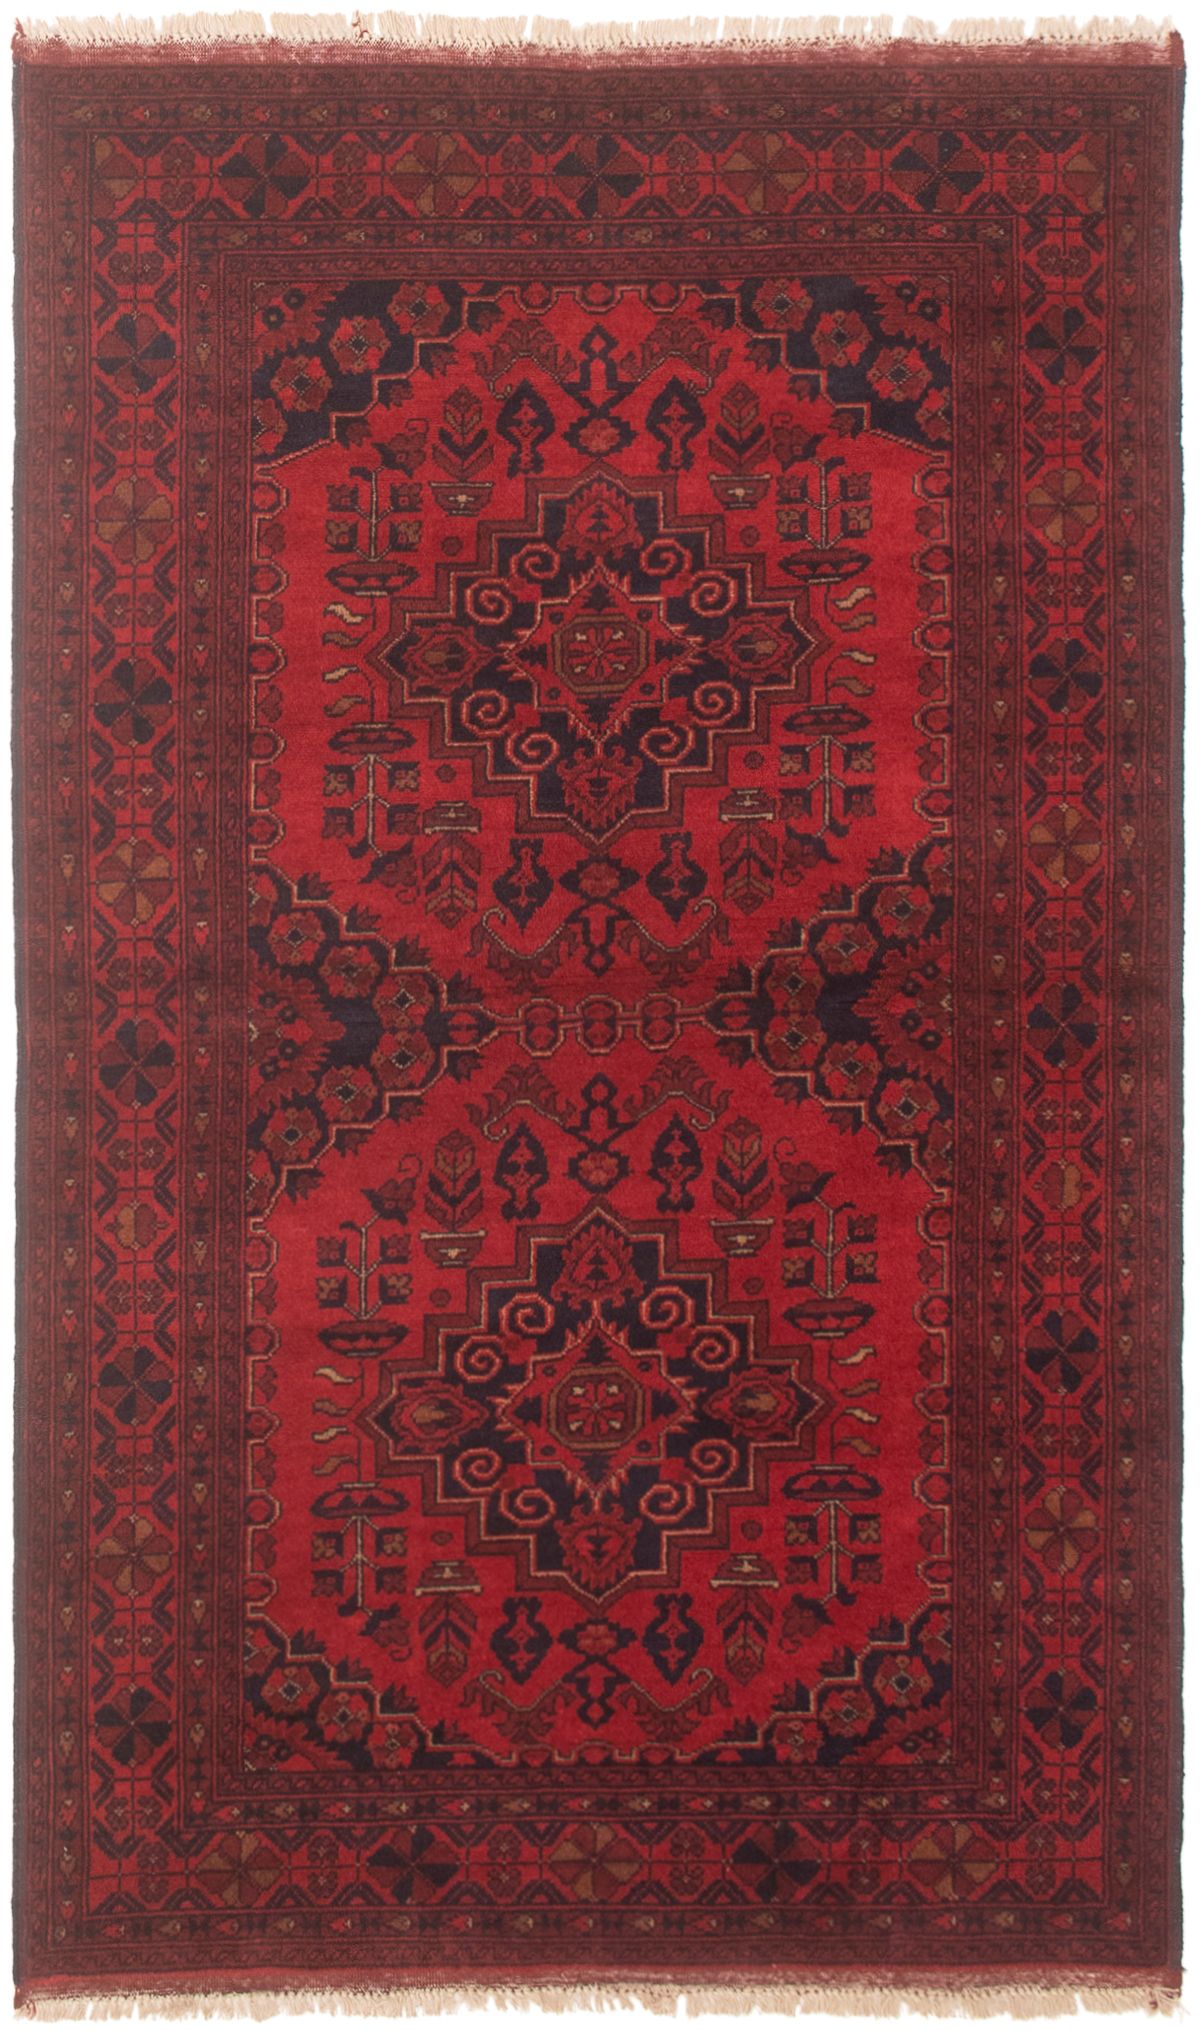 Hand-knotted Finest Khal Mohammadi Red Wool Rug 3'10" x 6'5"  Size: 3'10" x 6'5"  